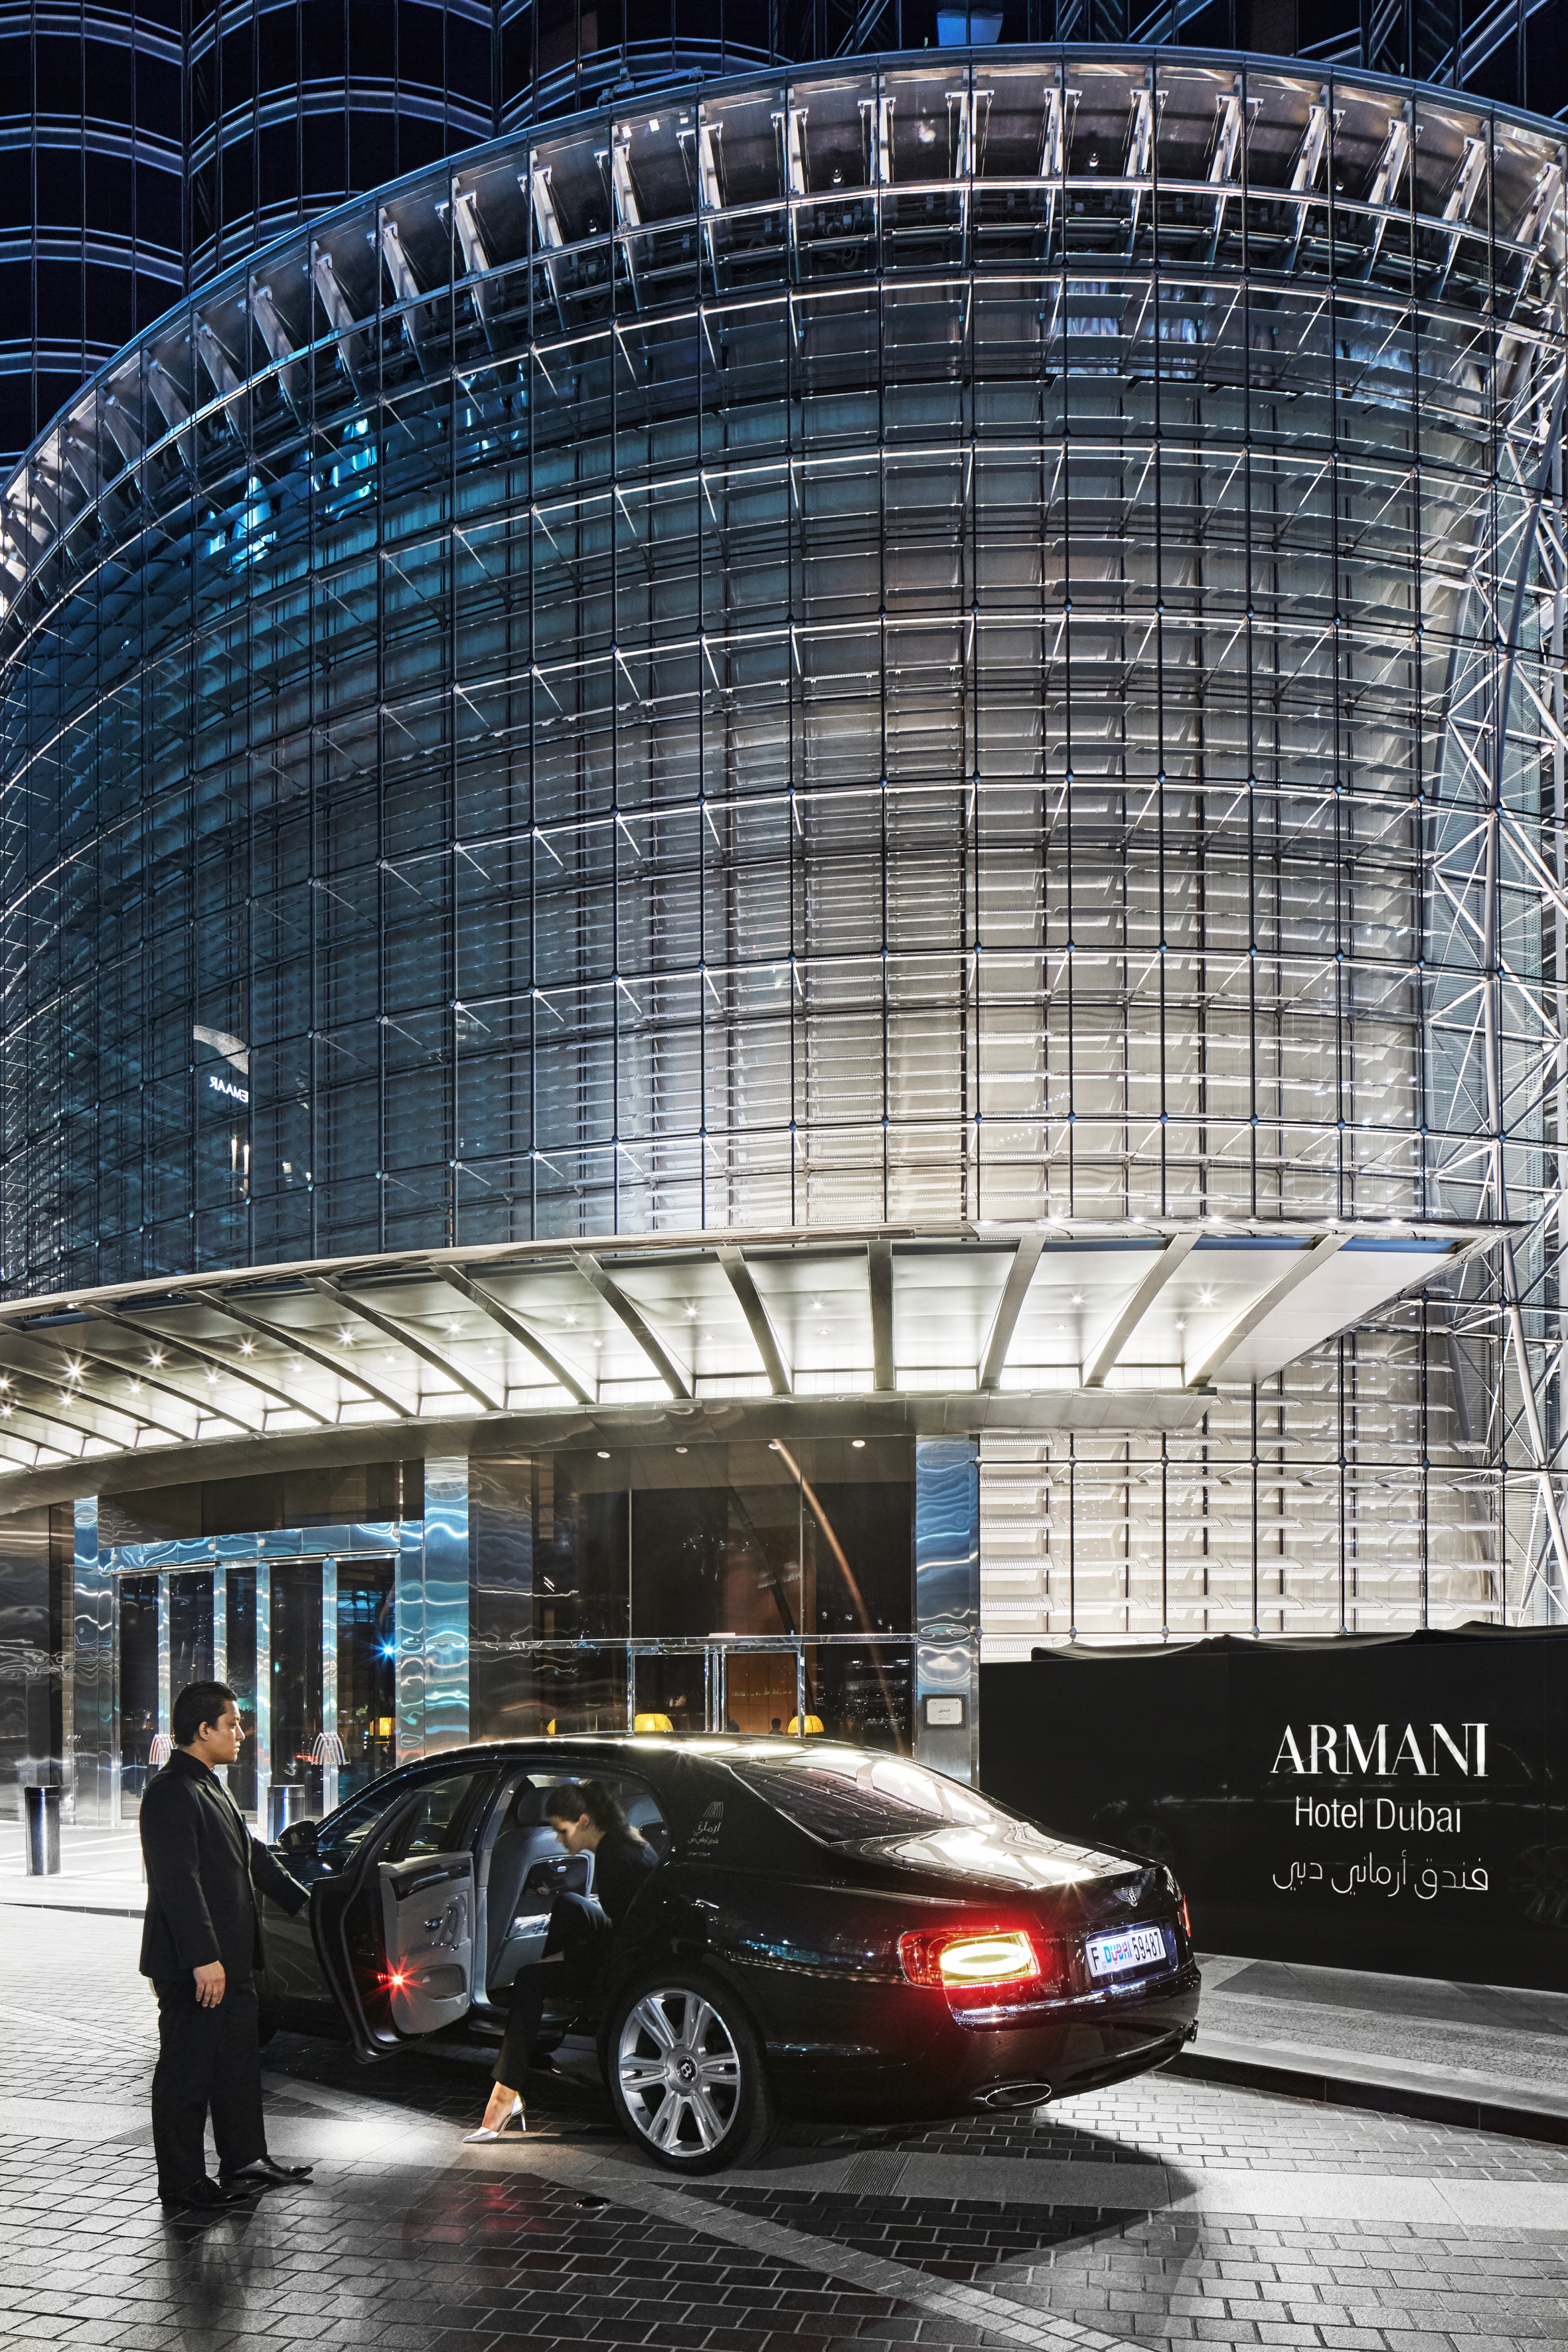 Armani Hotel Dubai Is The World's Most Luxurious Hotel – News & Events by  BRABBU DESIGN FORCES